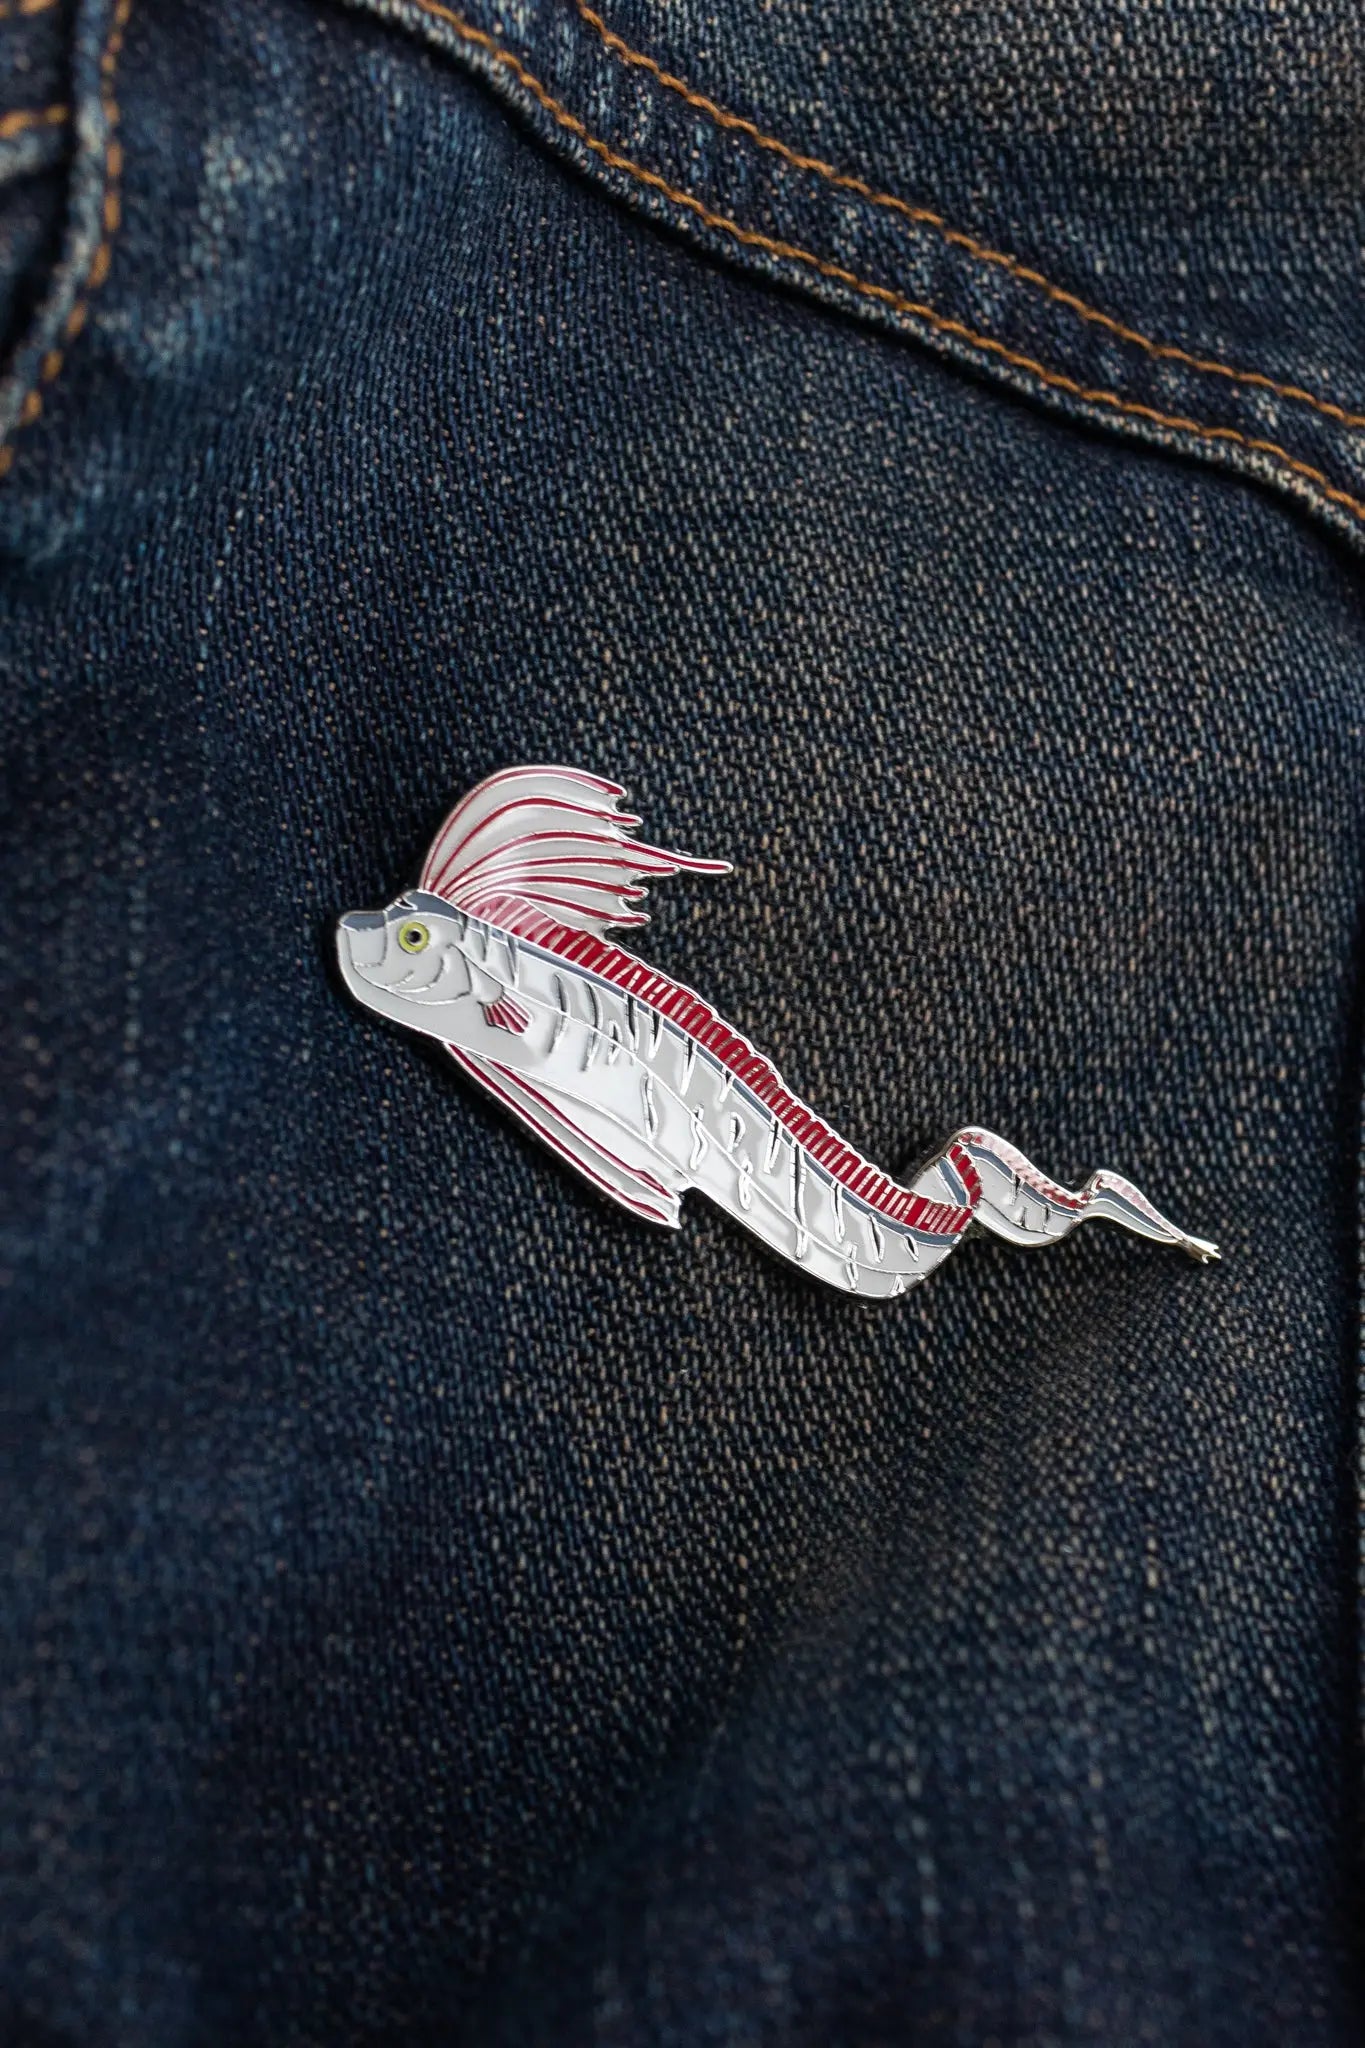 Regalecus Glesne (Giant Oarfish) Pin - Stemcell Science Shop